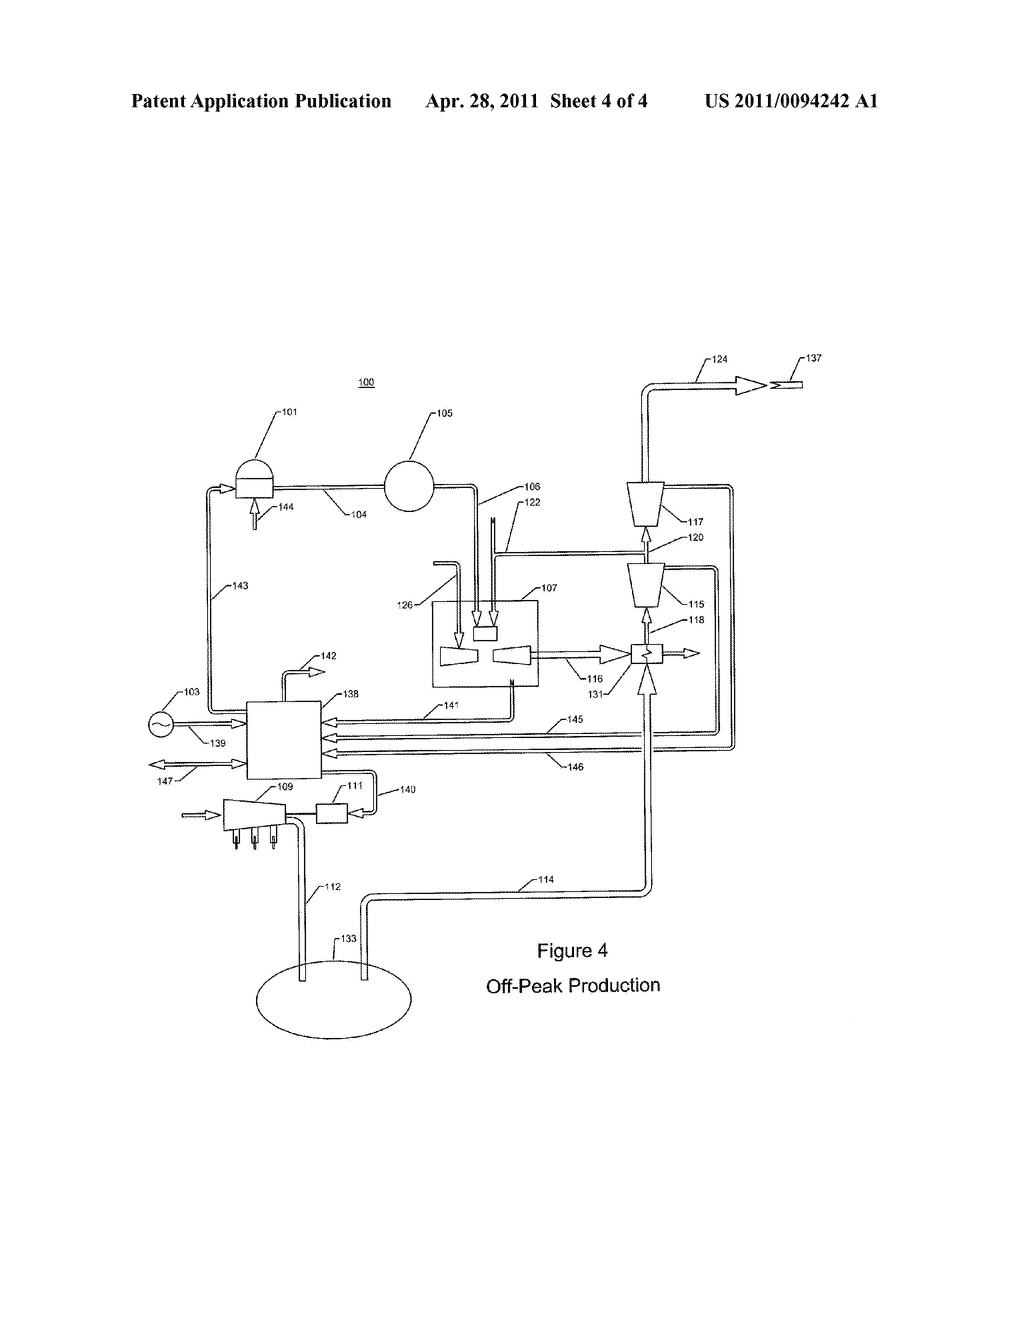 Method and Apparatus for Generating Sustainable, Study State Power and Cooling from a Intermittent Power Source using Renewable Energy as a Primary Power Source - diagram, schematic, and image 05